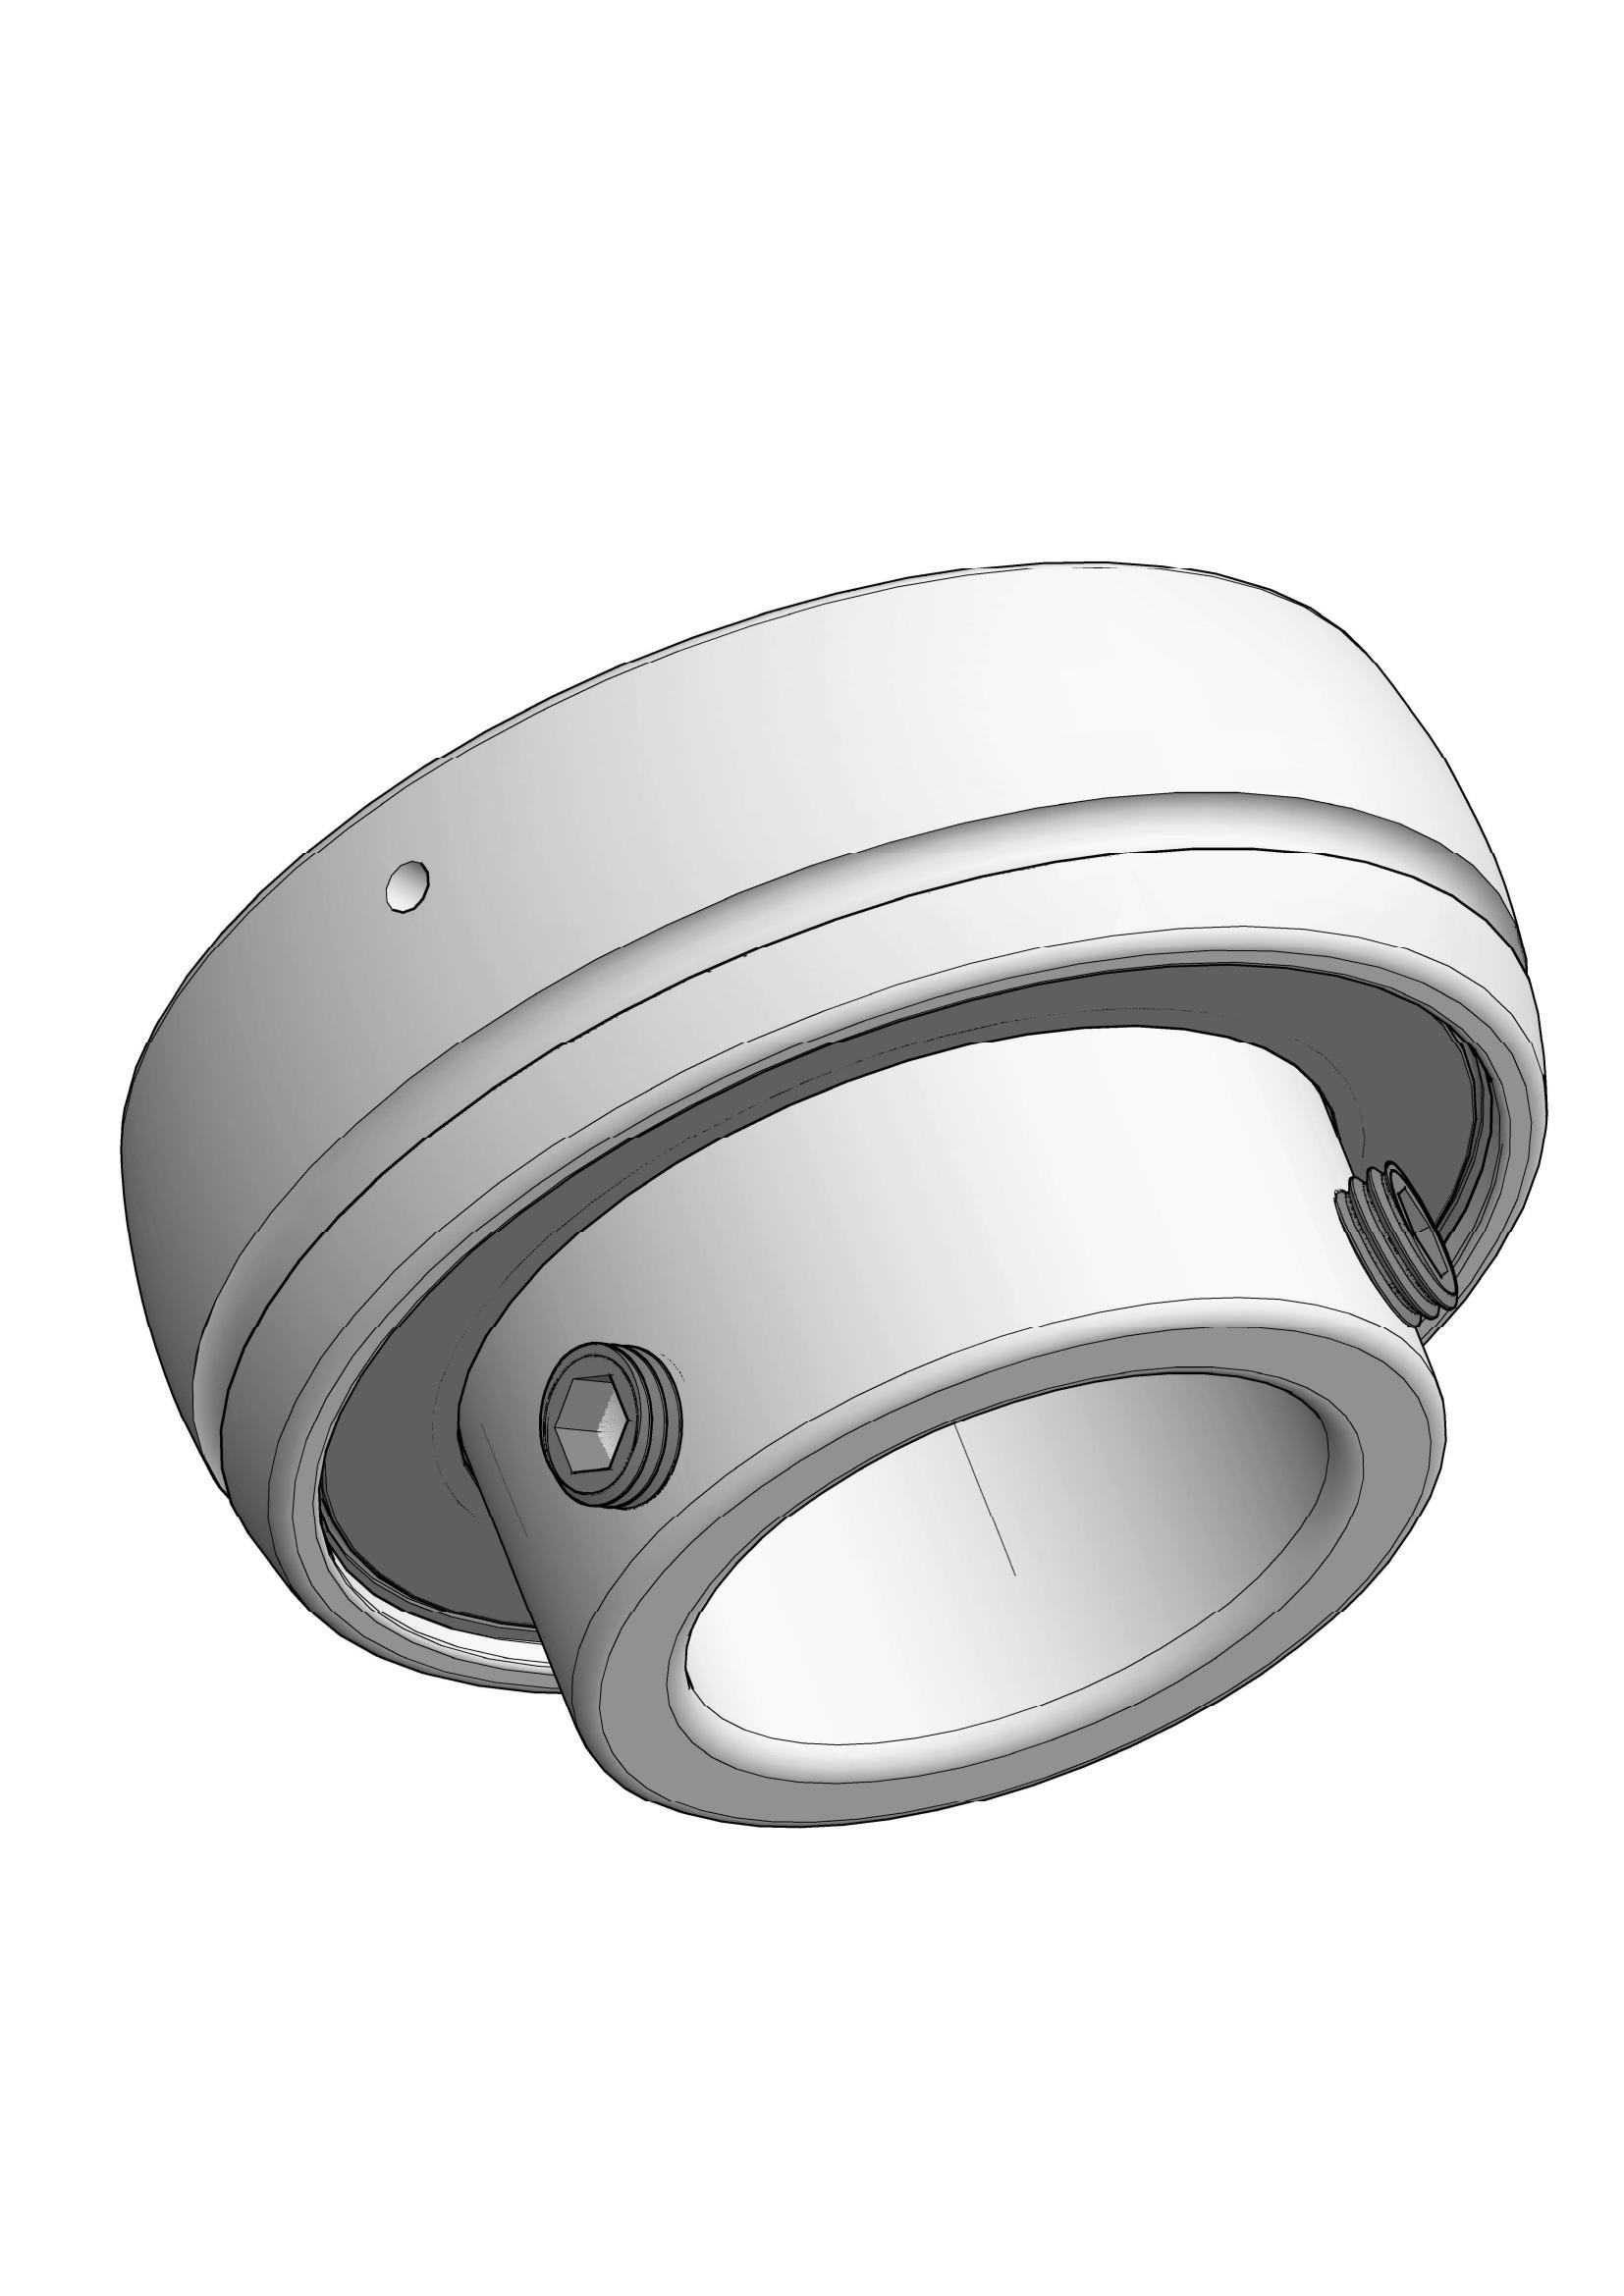 SB209-27 insert ball bearings with Eccentric Collar Lock with 1-11/16 inch Bore